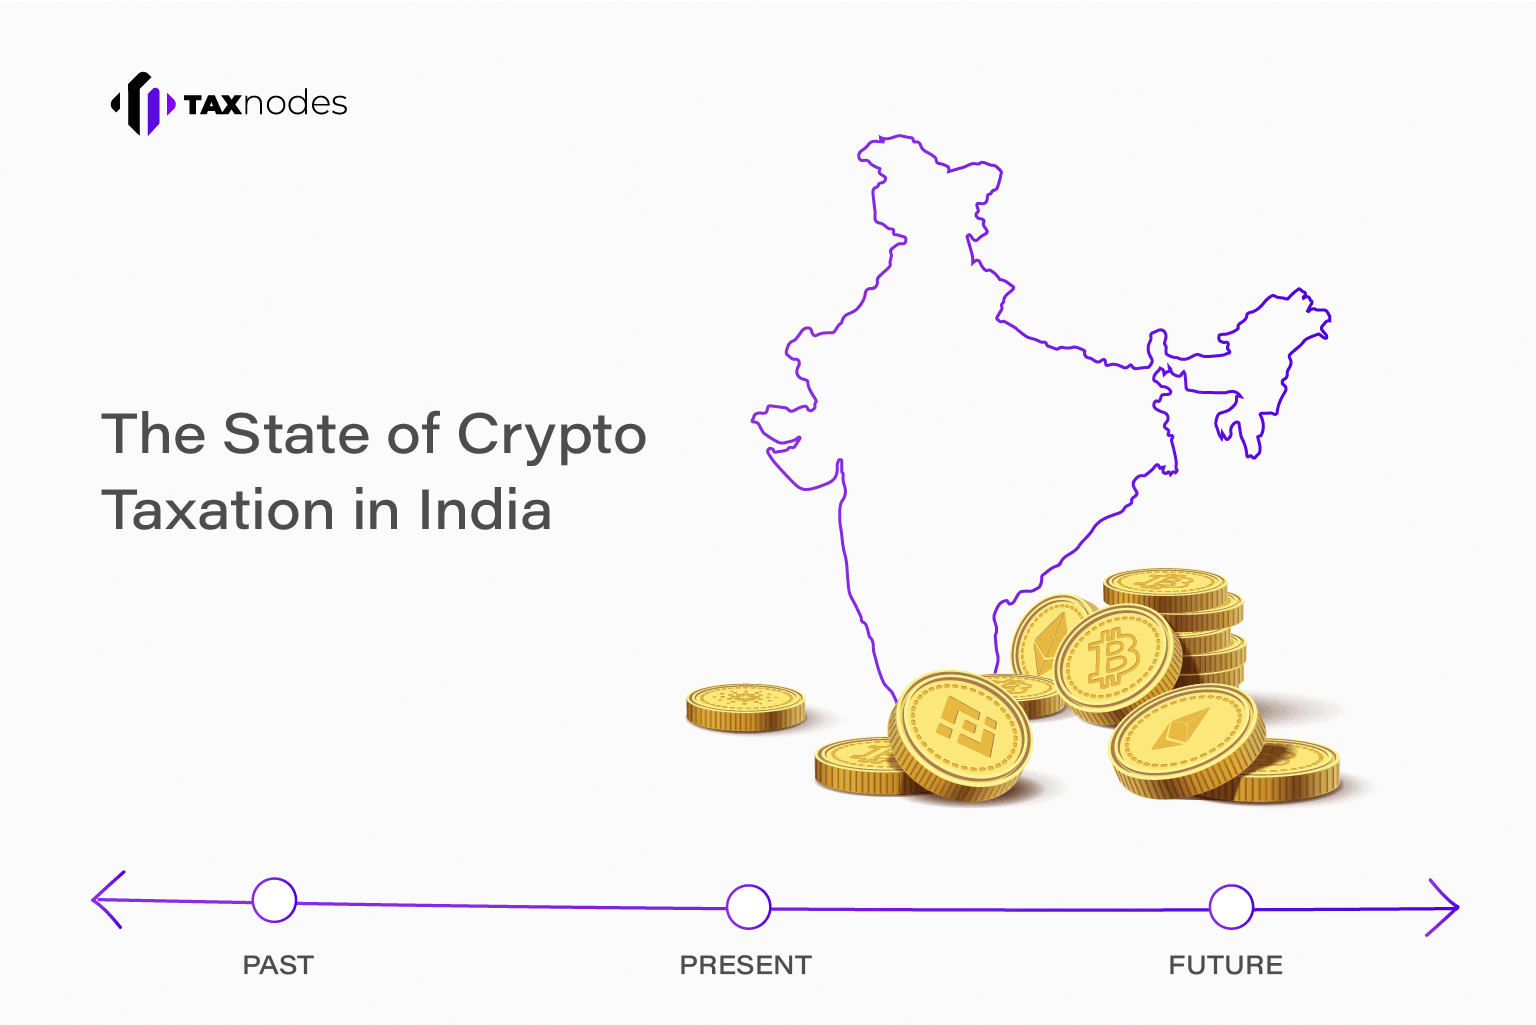 The state of crypto taxation in India